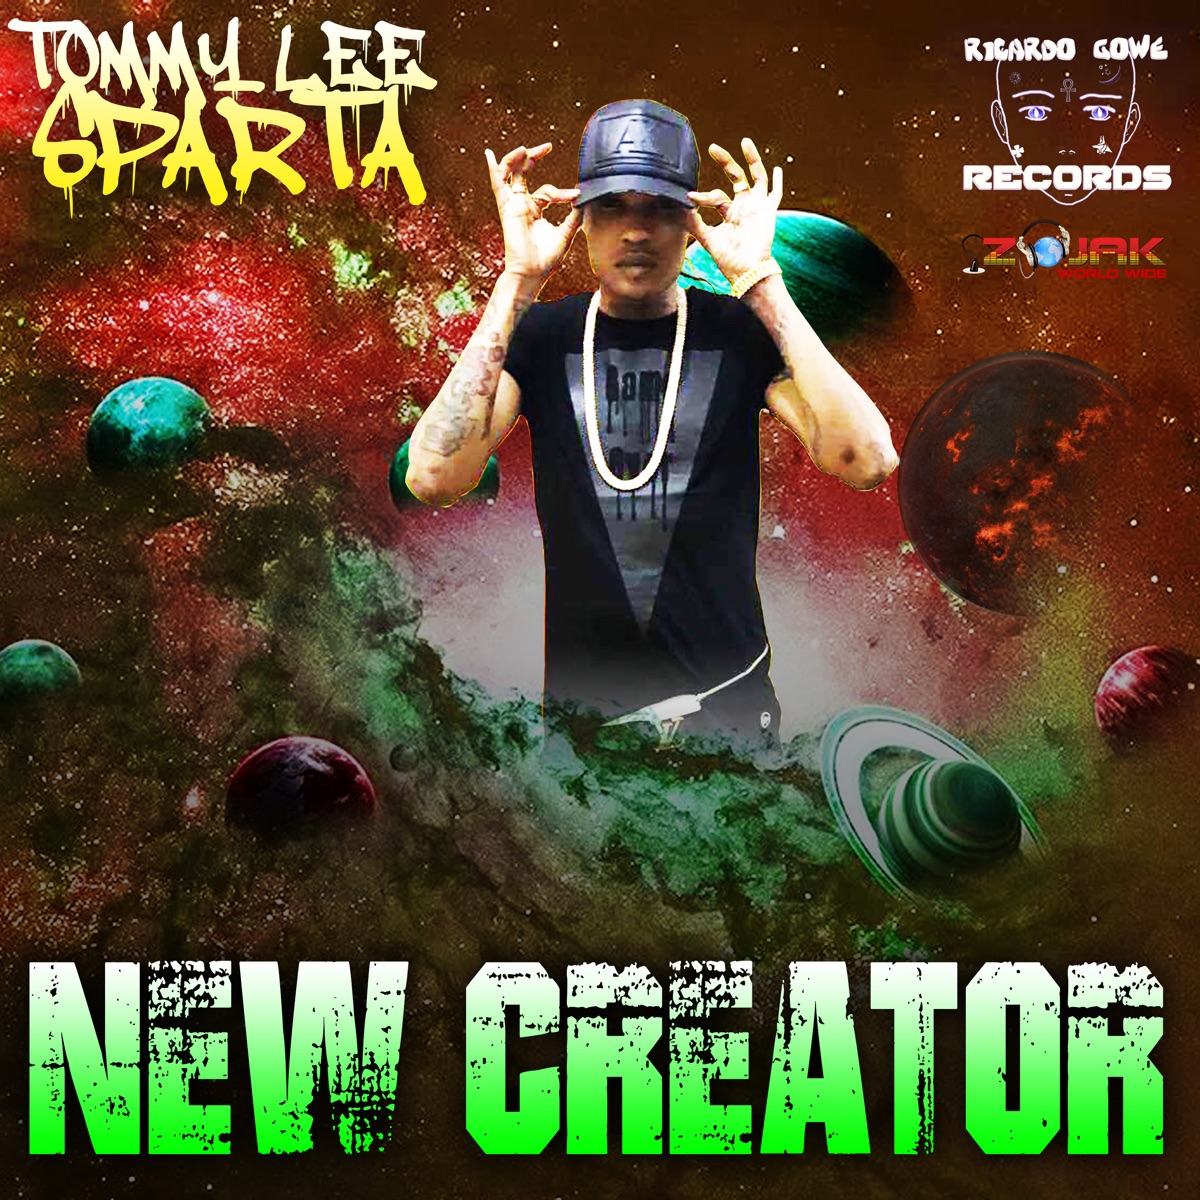 Tommy Lee Sparta: Psycho EP - Album by Tommy Lee Sparta - Apple Music